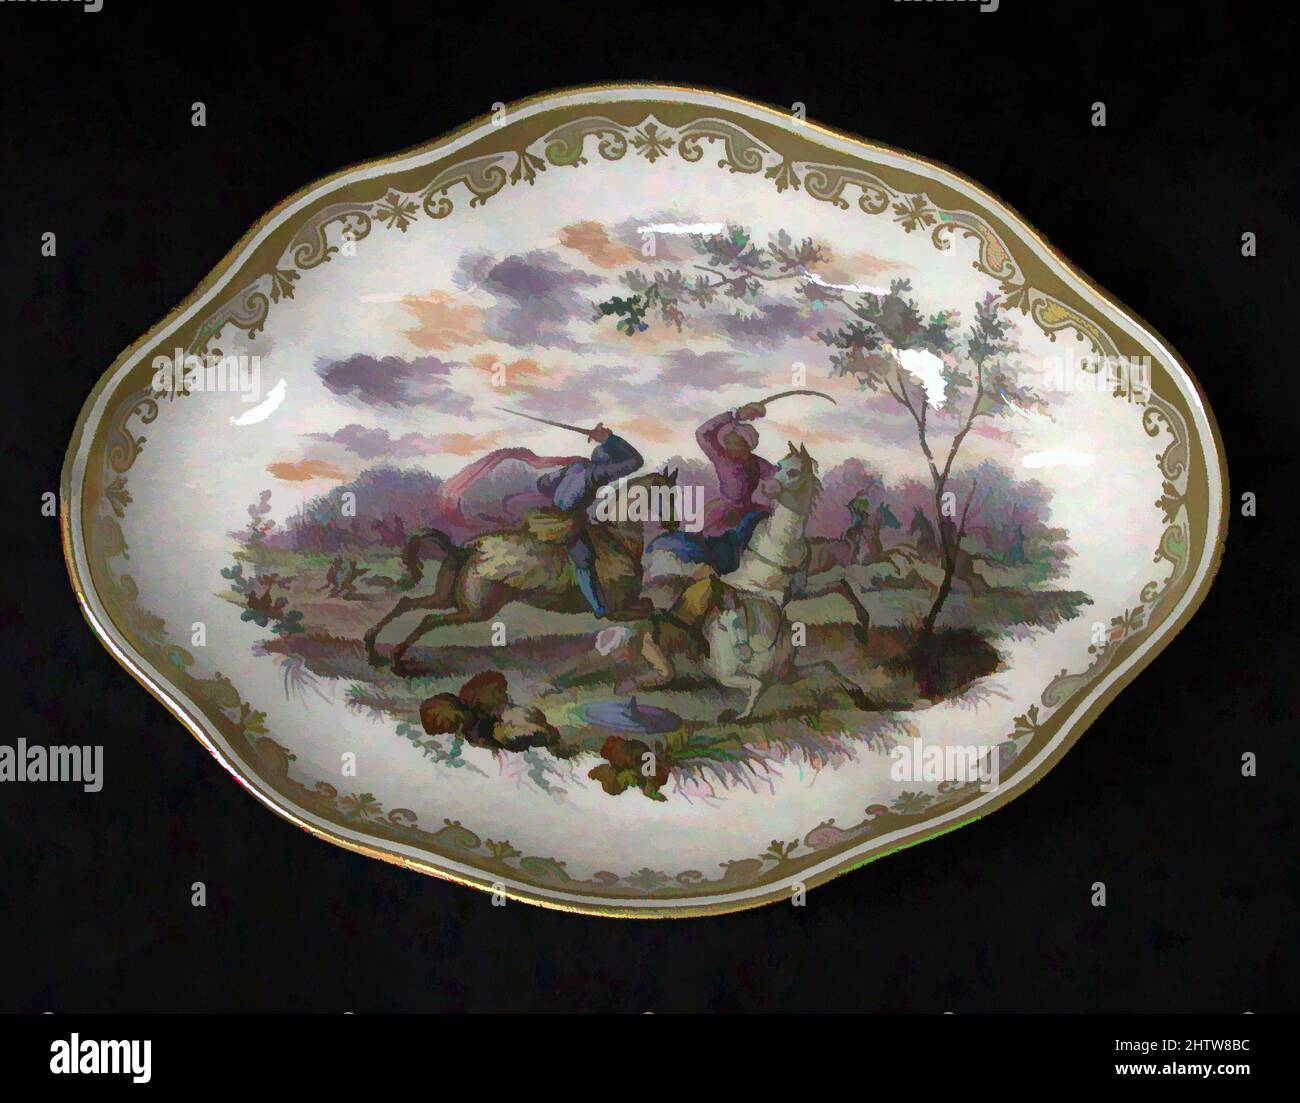 Art inspired by Oval tray (part of a service), 1743–59, Italian, Naples, Soft-paste porcelain, Width: 7 5/16 in. (18.6 cm), Ceramics-Porcelain, Classic works modernized by Artotop with a splash of modernity. Shapes, color and value, eye-catching visual impact on art. Emotions through freedom of artworks in a contemporary way. A timeless message pursuing a wildly creative new direction. Artists turning to the digital medium and creating the Artotop NFT Stock Photo